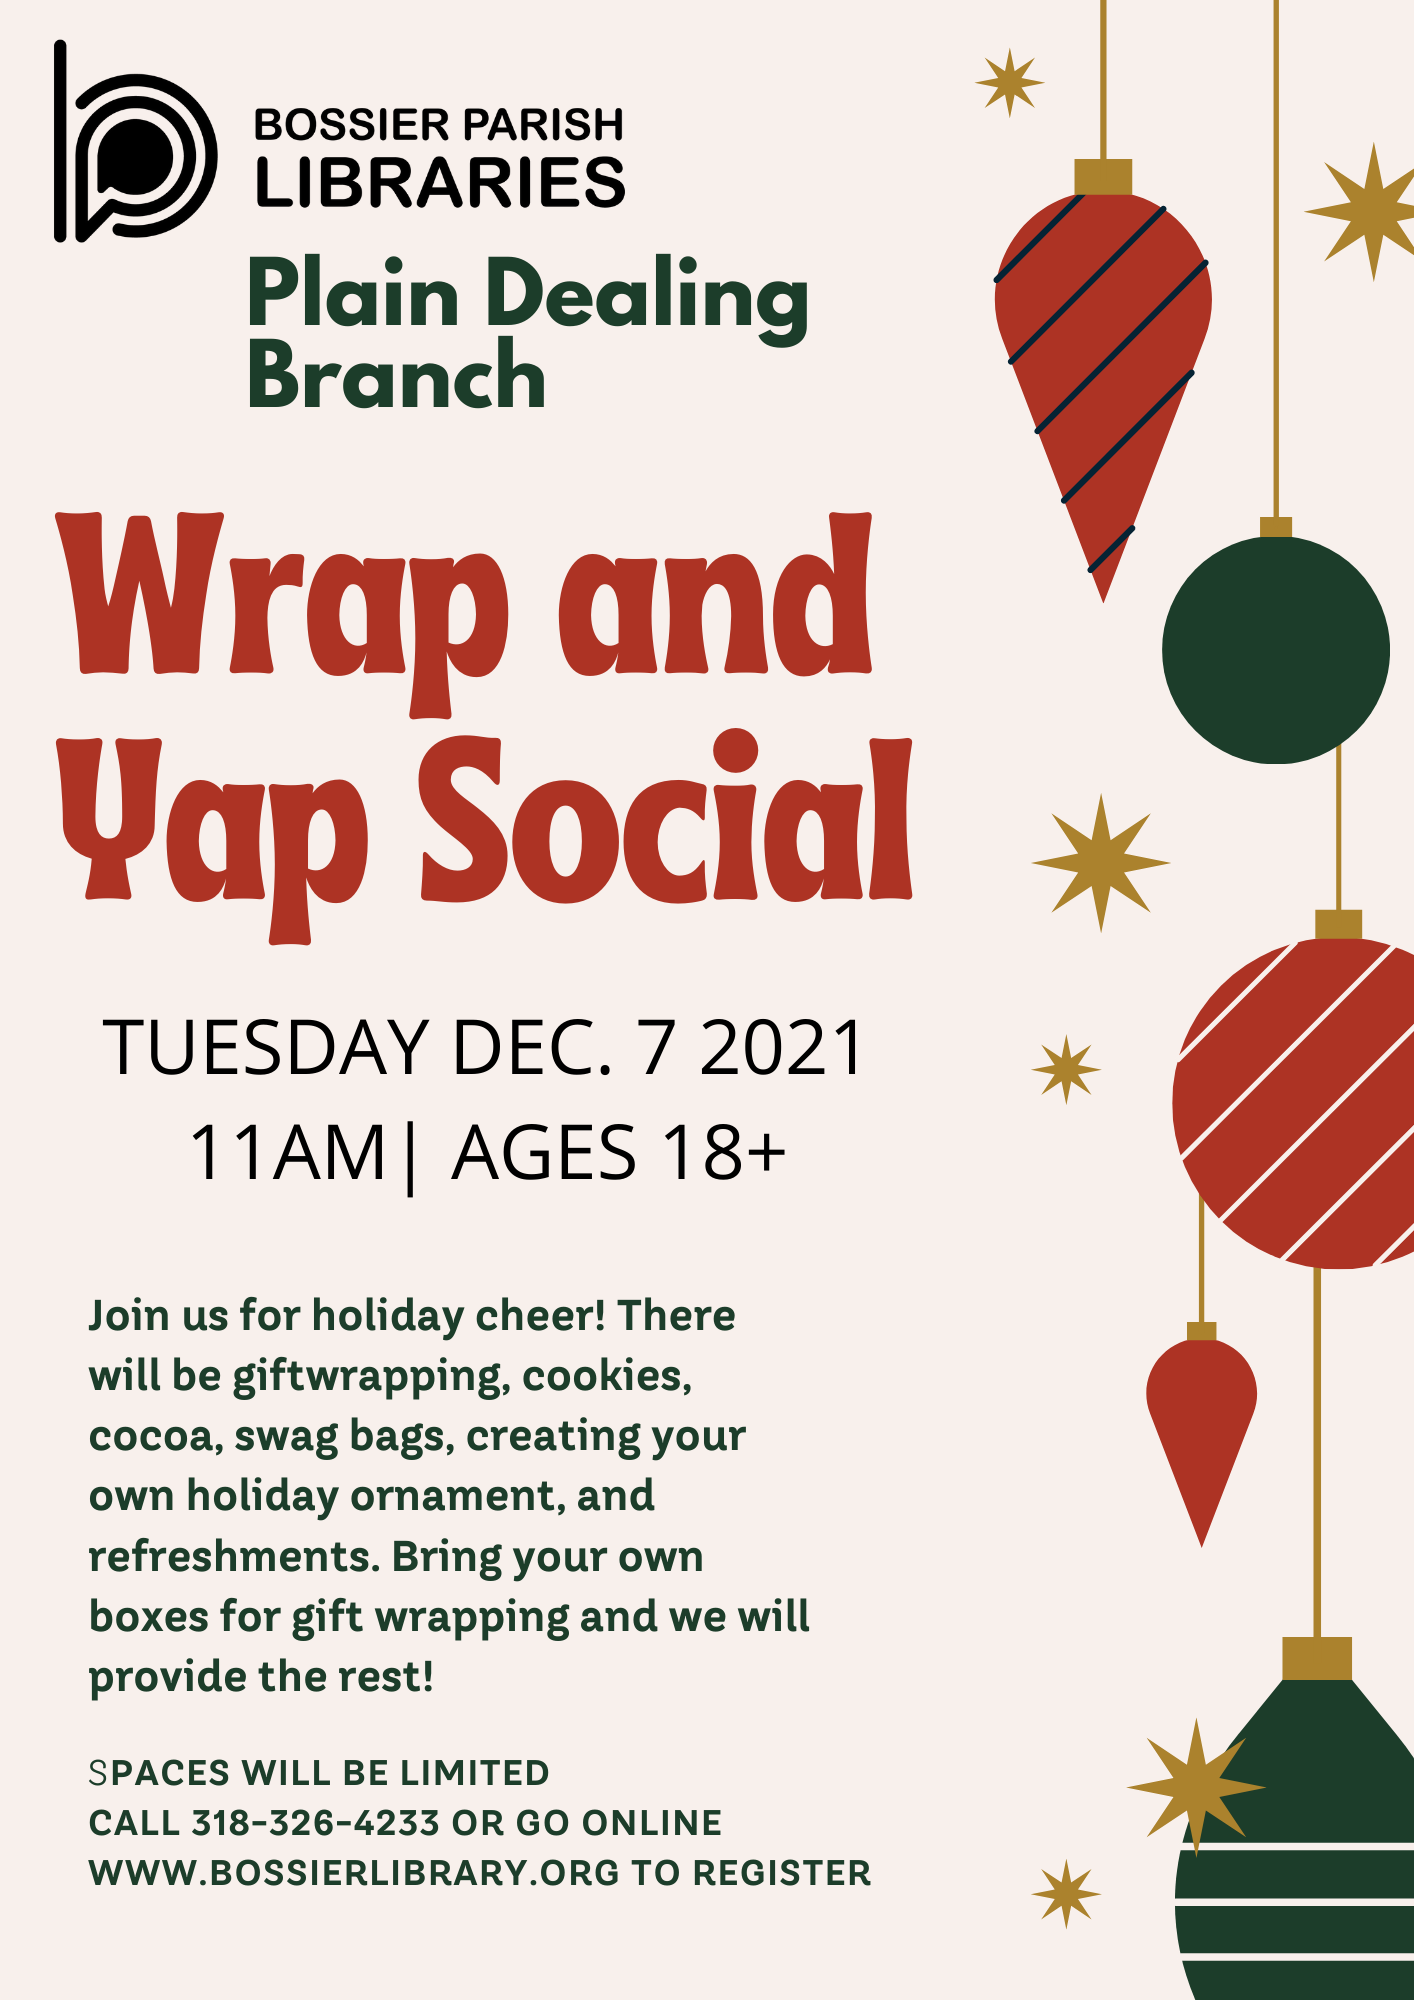 Wrap and Yap Social